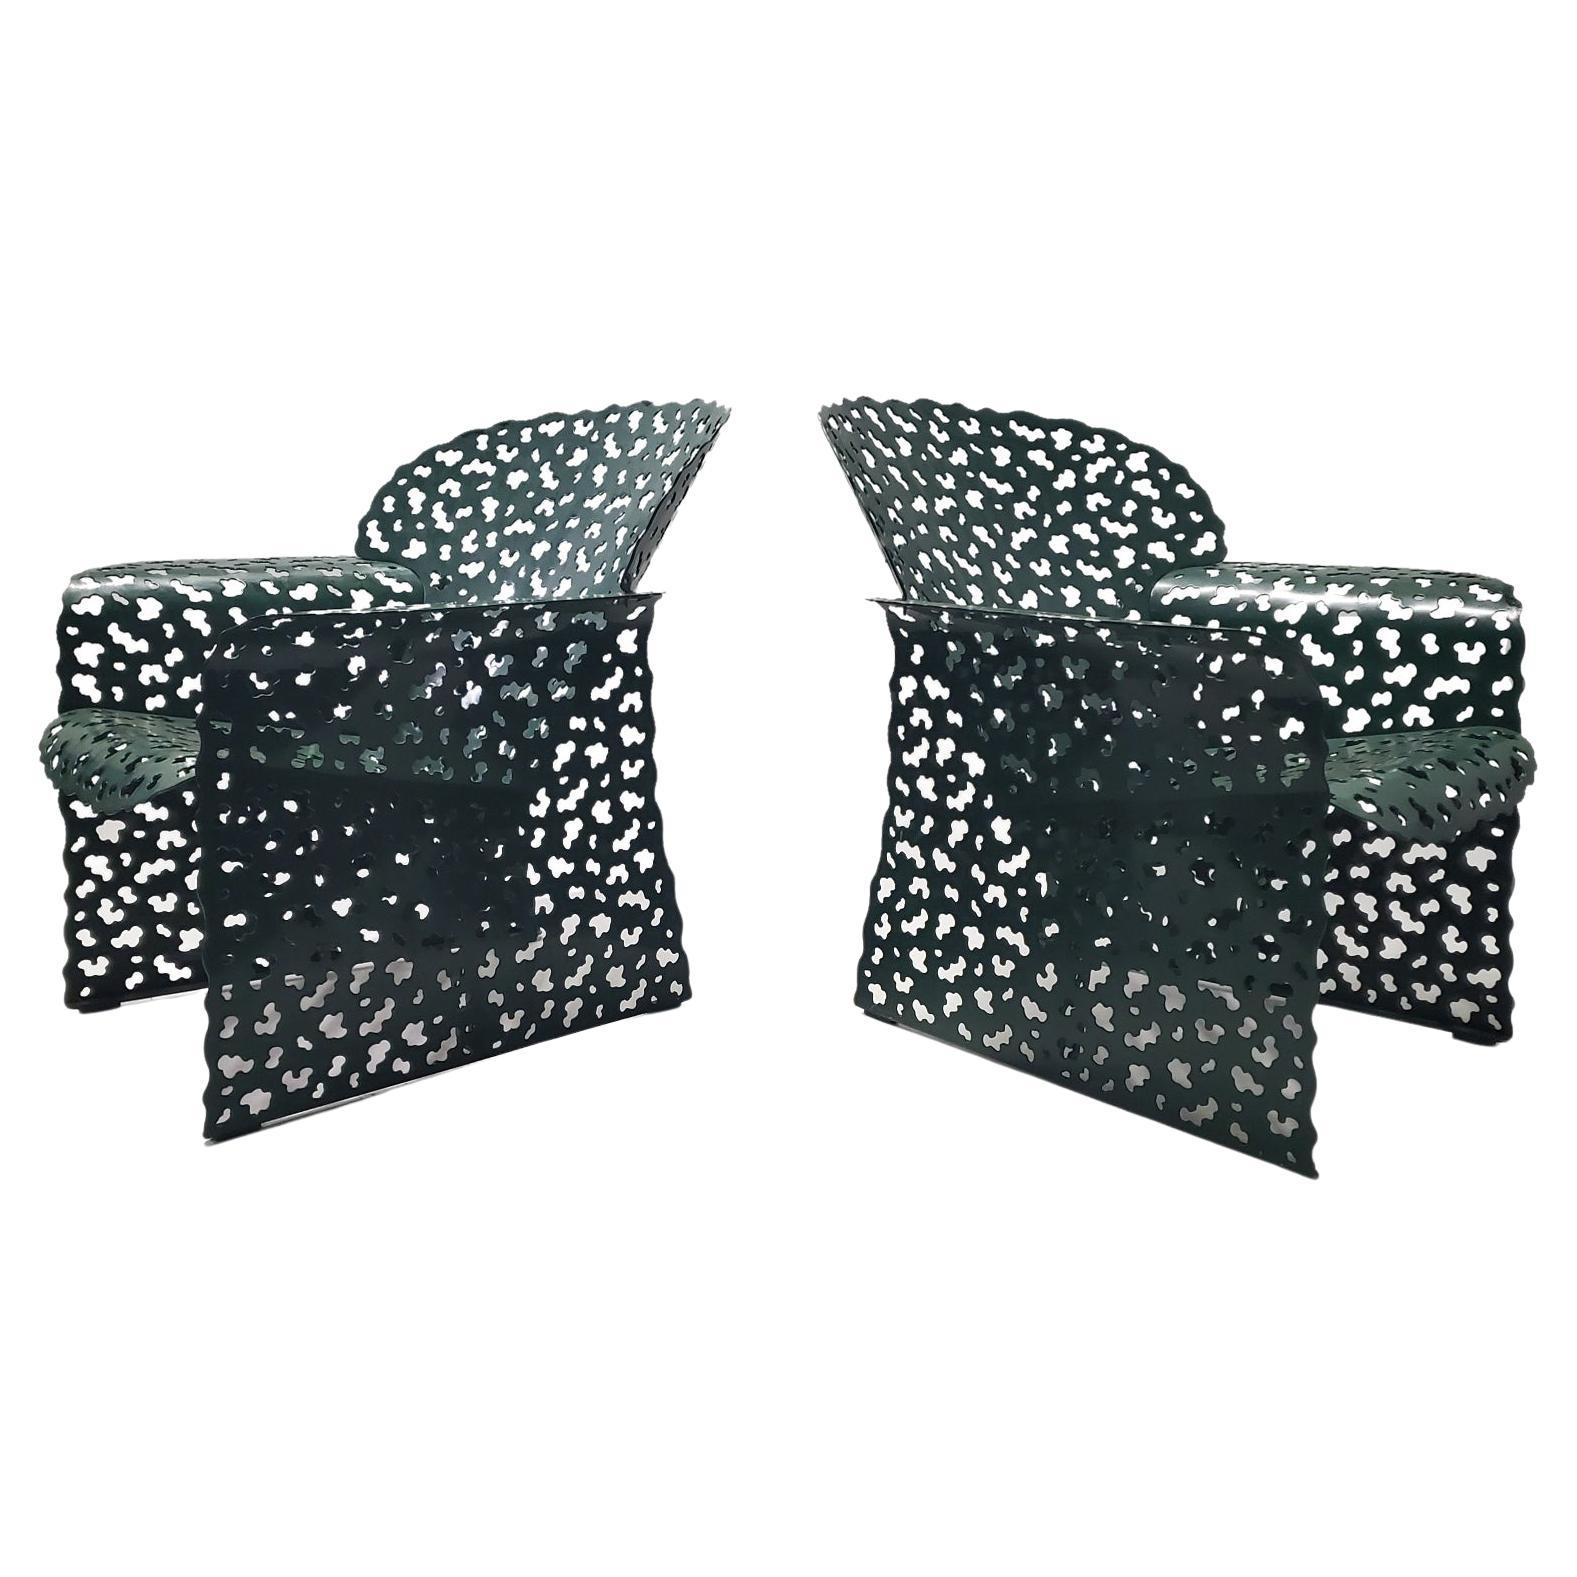 Pair of Richard Schultz for Knoll Topiary Collection Lounge Chairs 1997